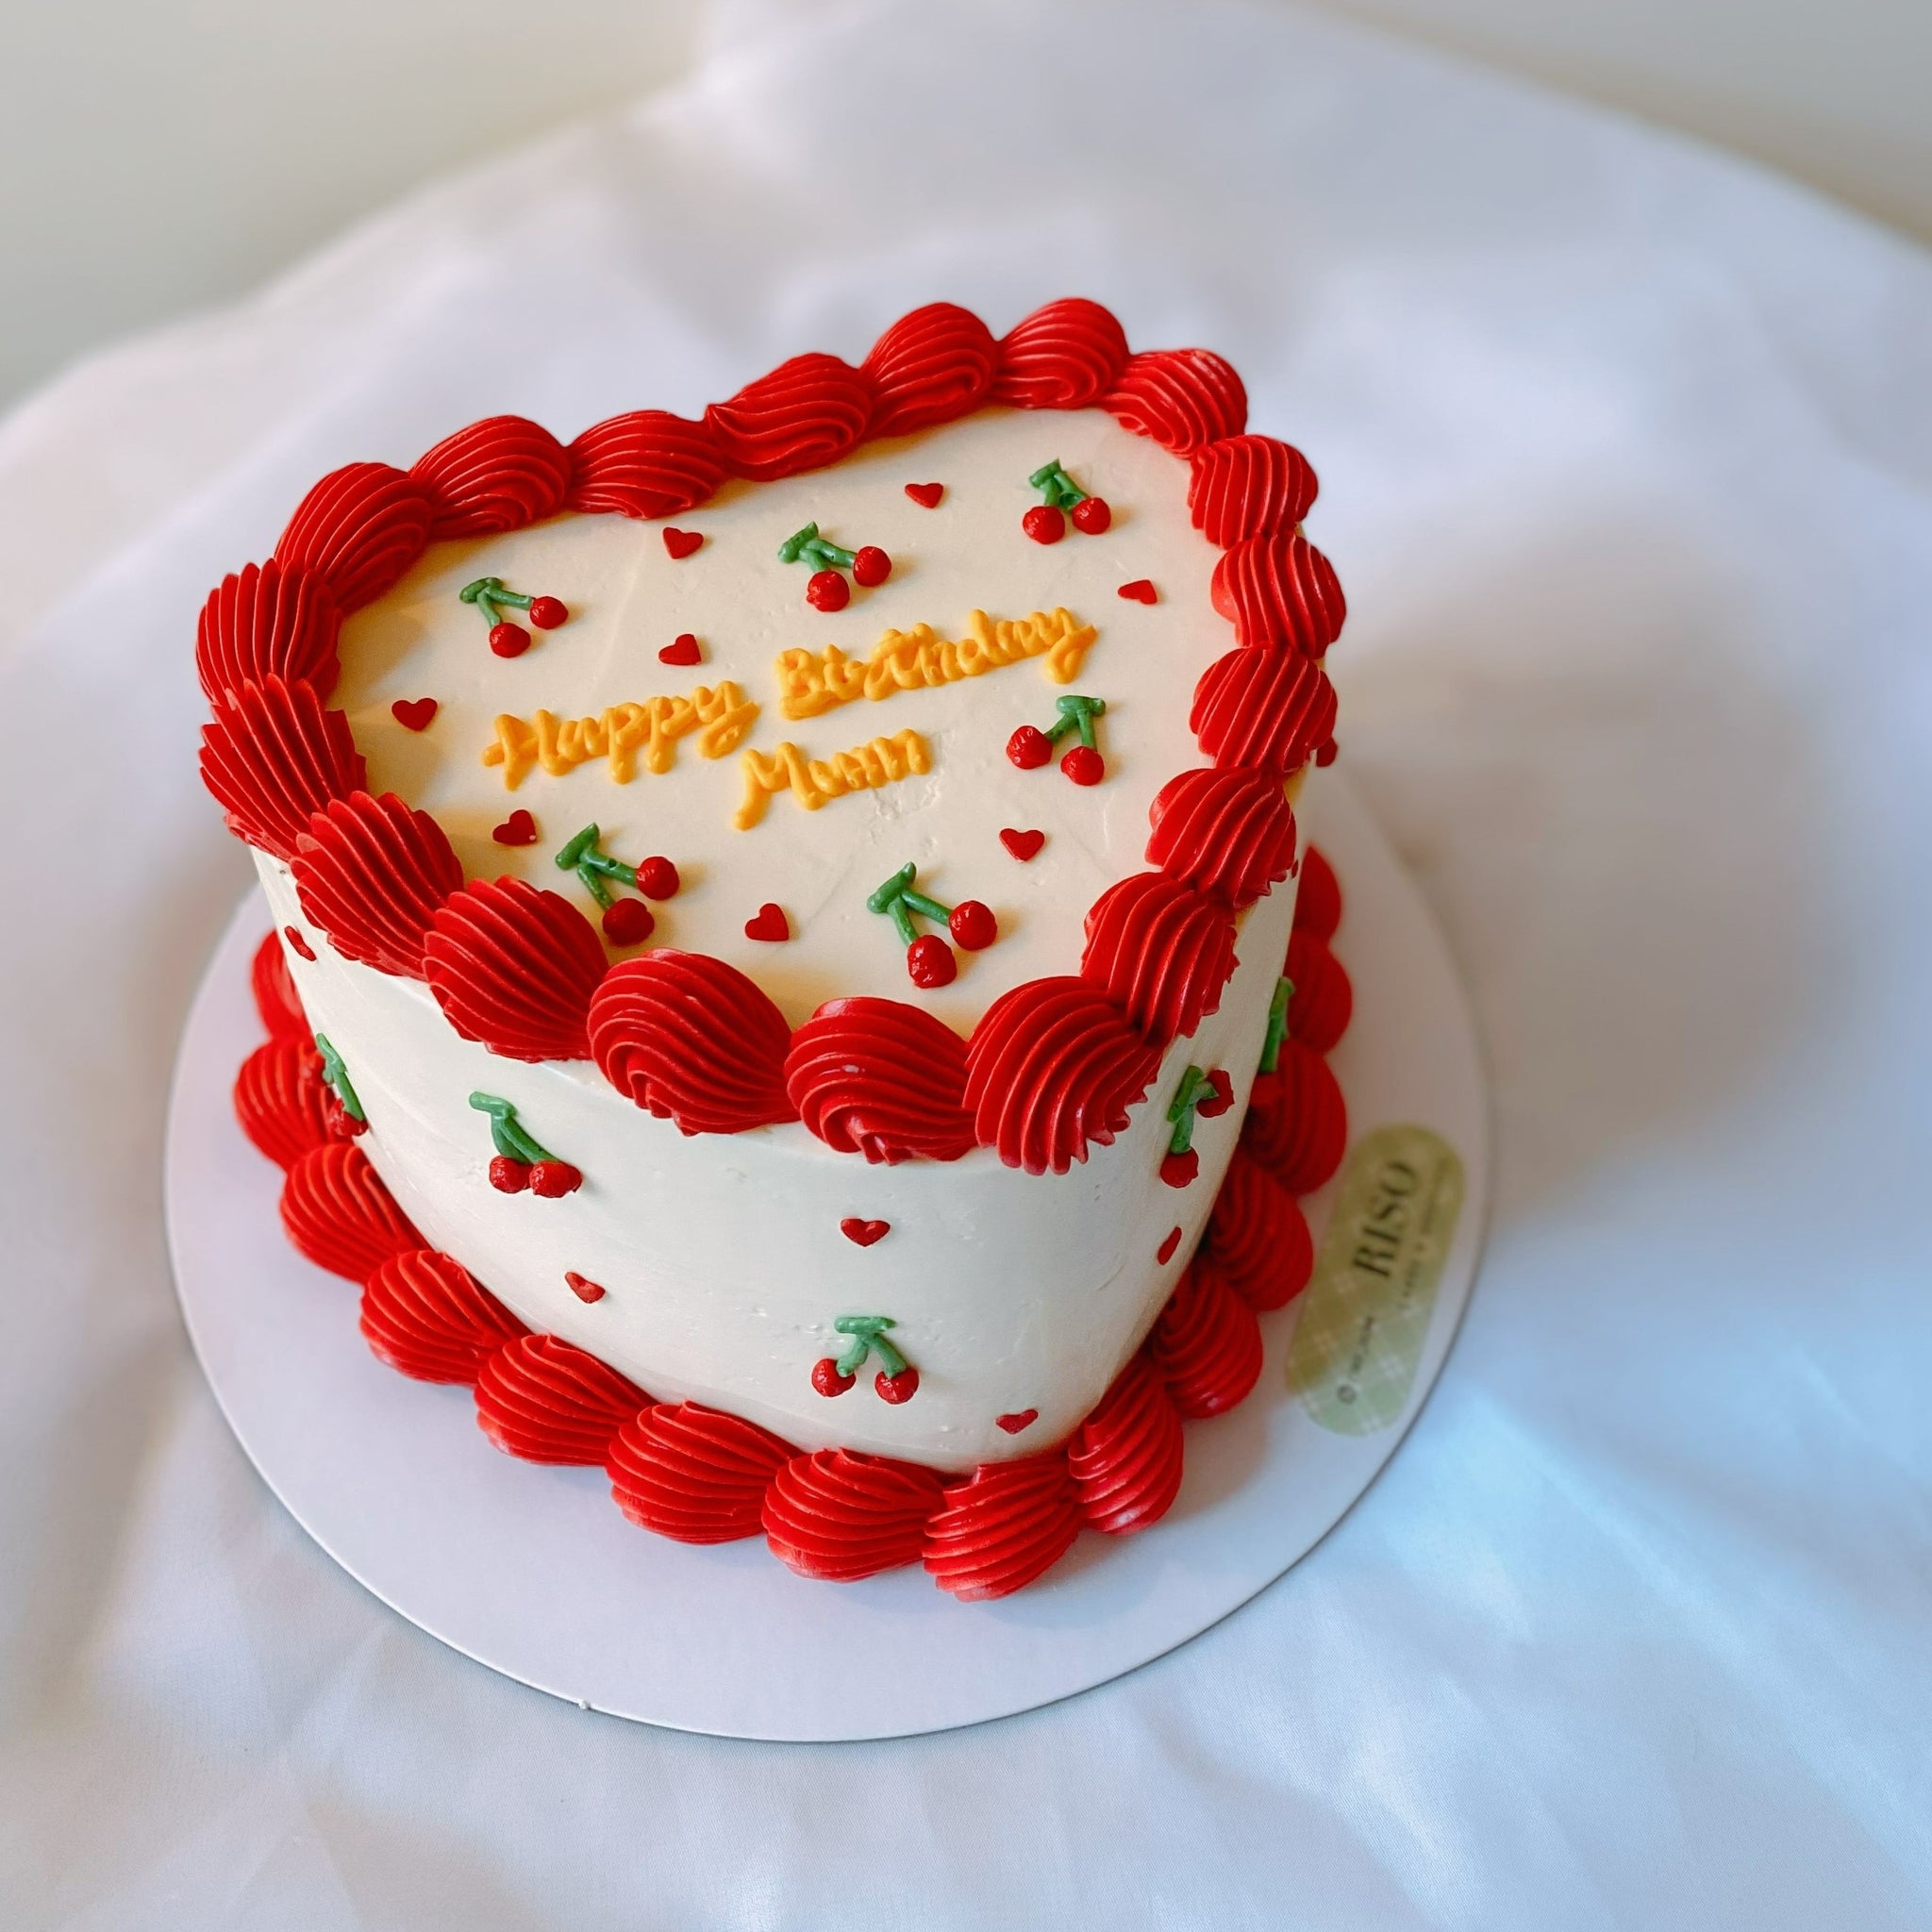 Order White Forest Cherry Cake Online | Birthday Cake Online in India,  Price Rs. 719 - IndiaGiftsKart